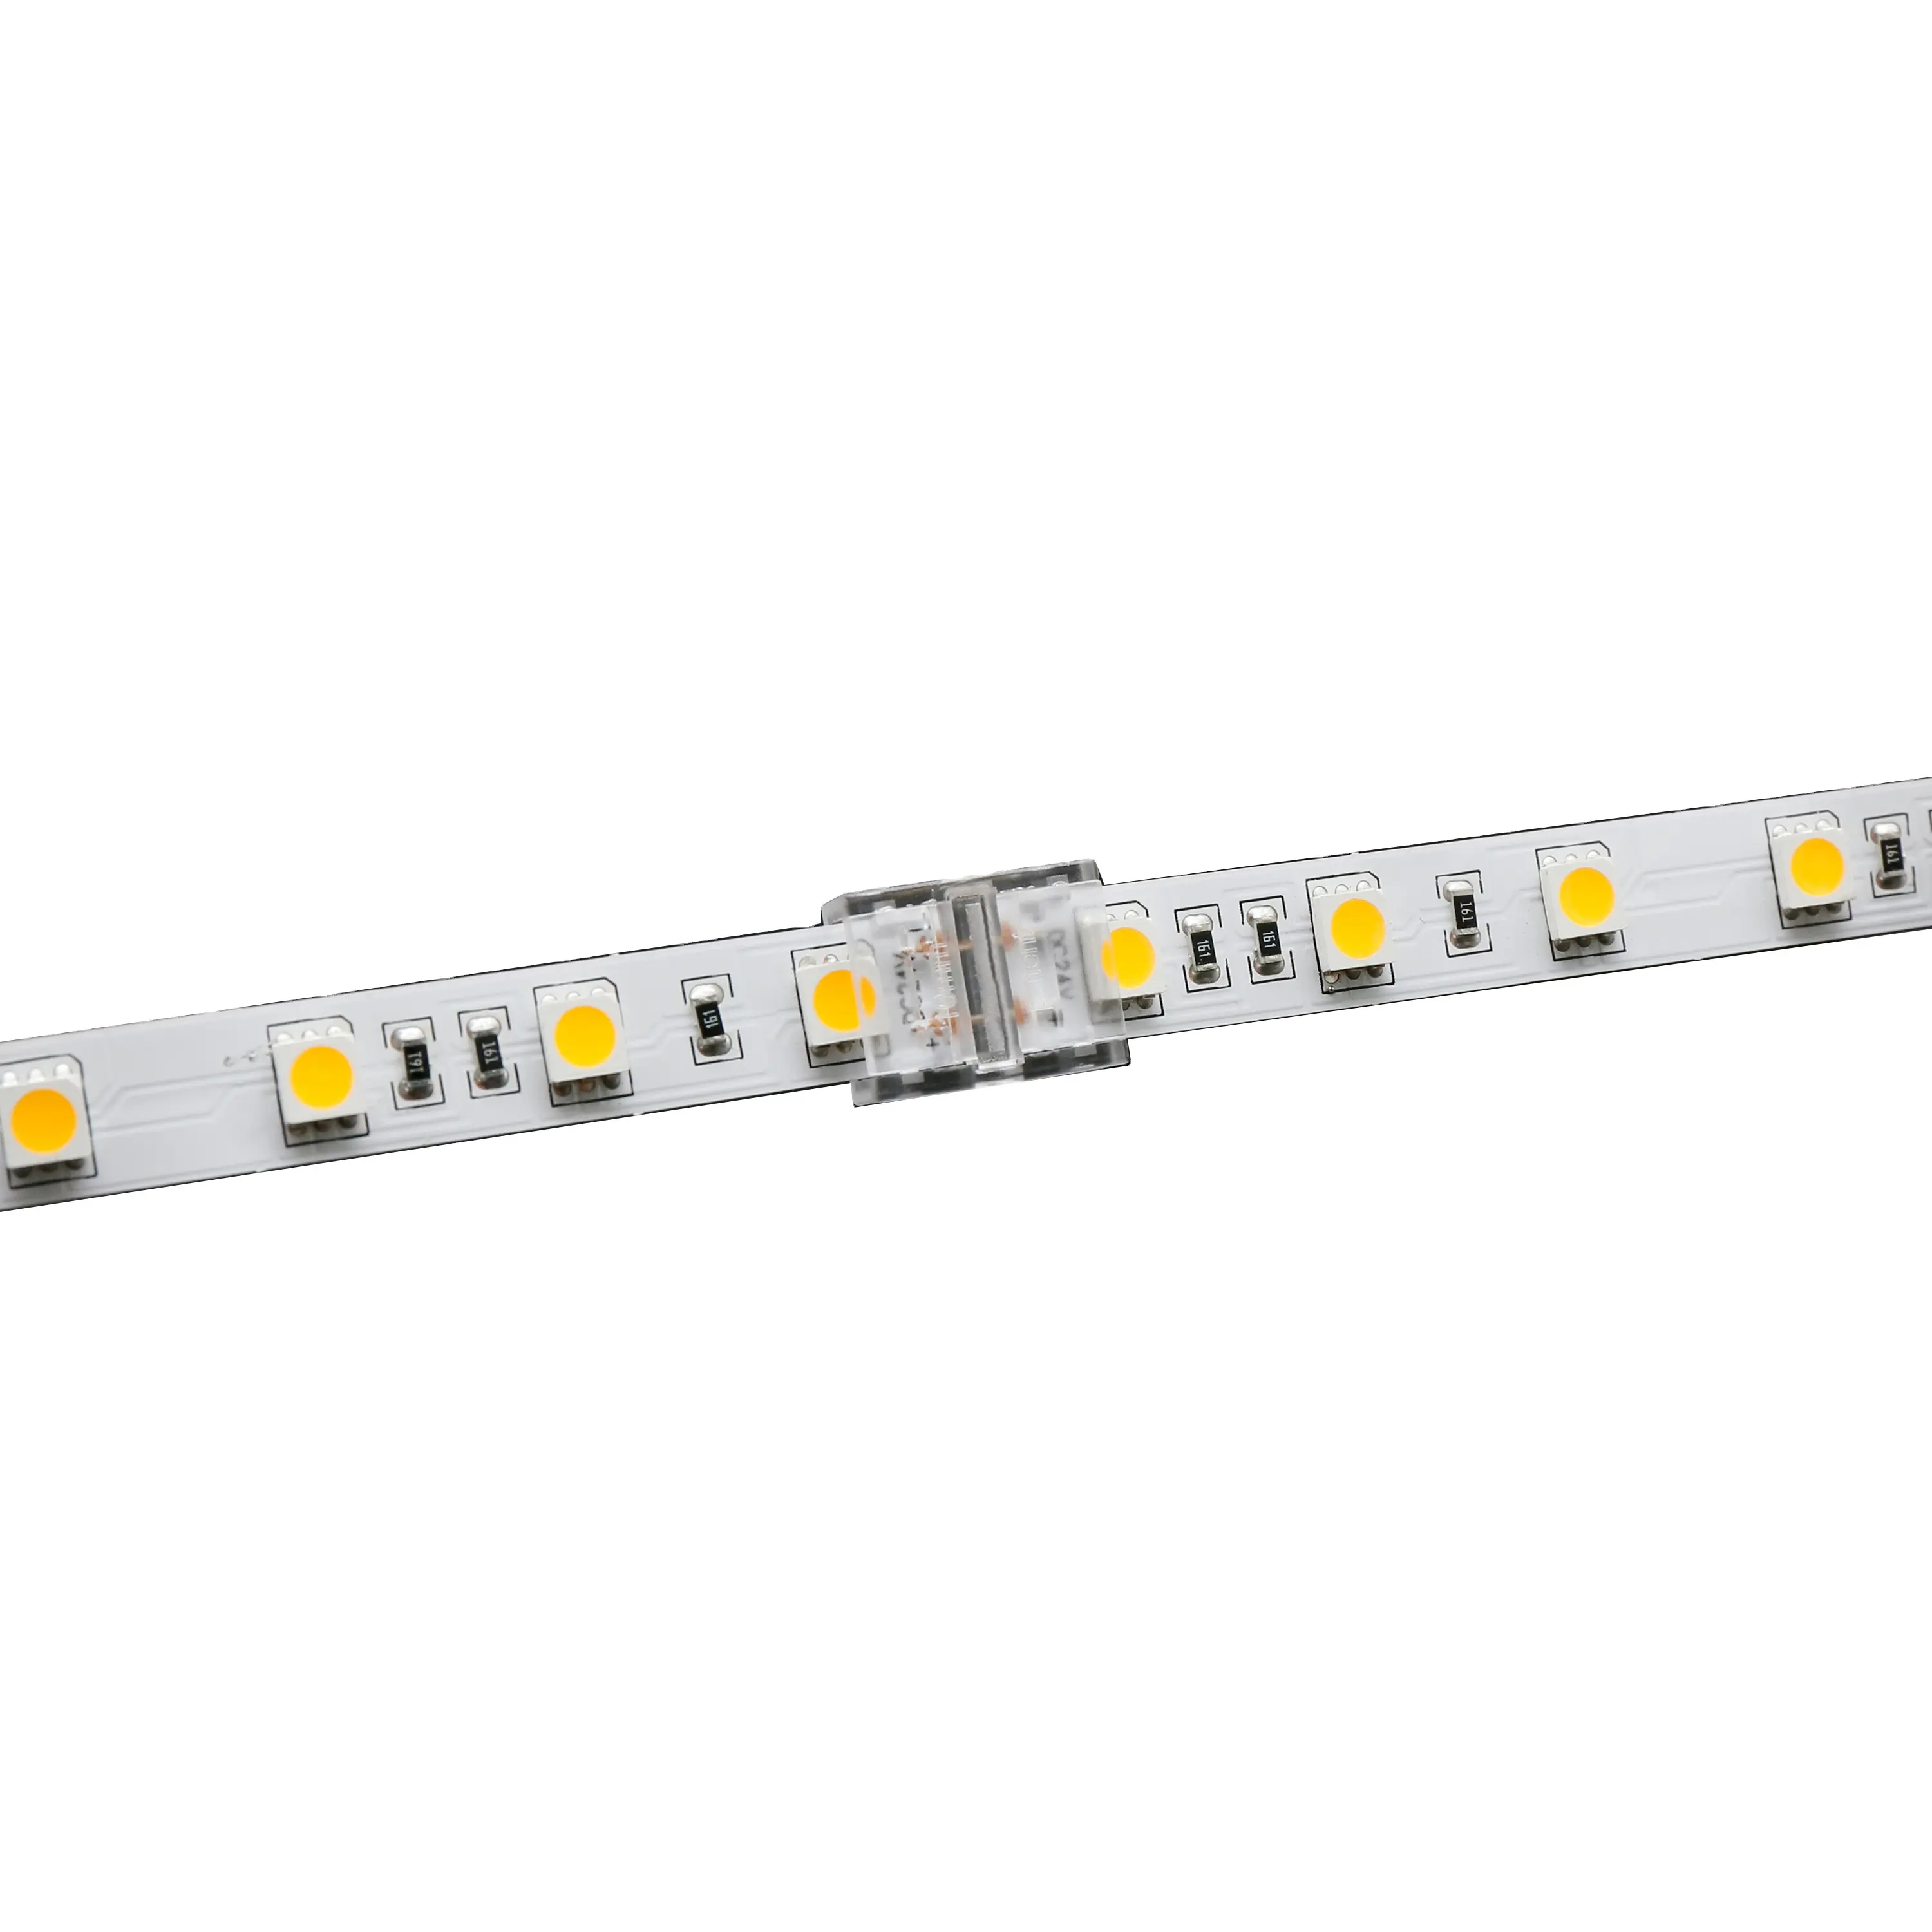 2 Pin 10mm PCB width 5050/2835 LED Strips Connector Solderless Strip to Strip